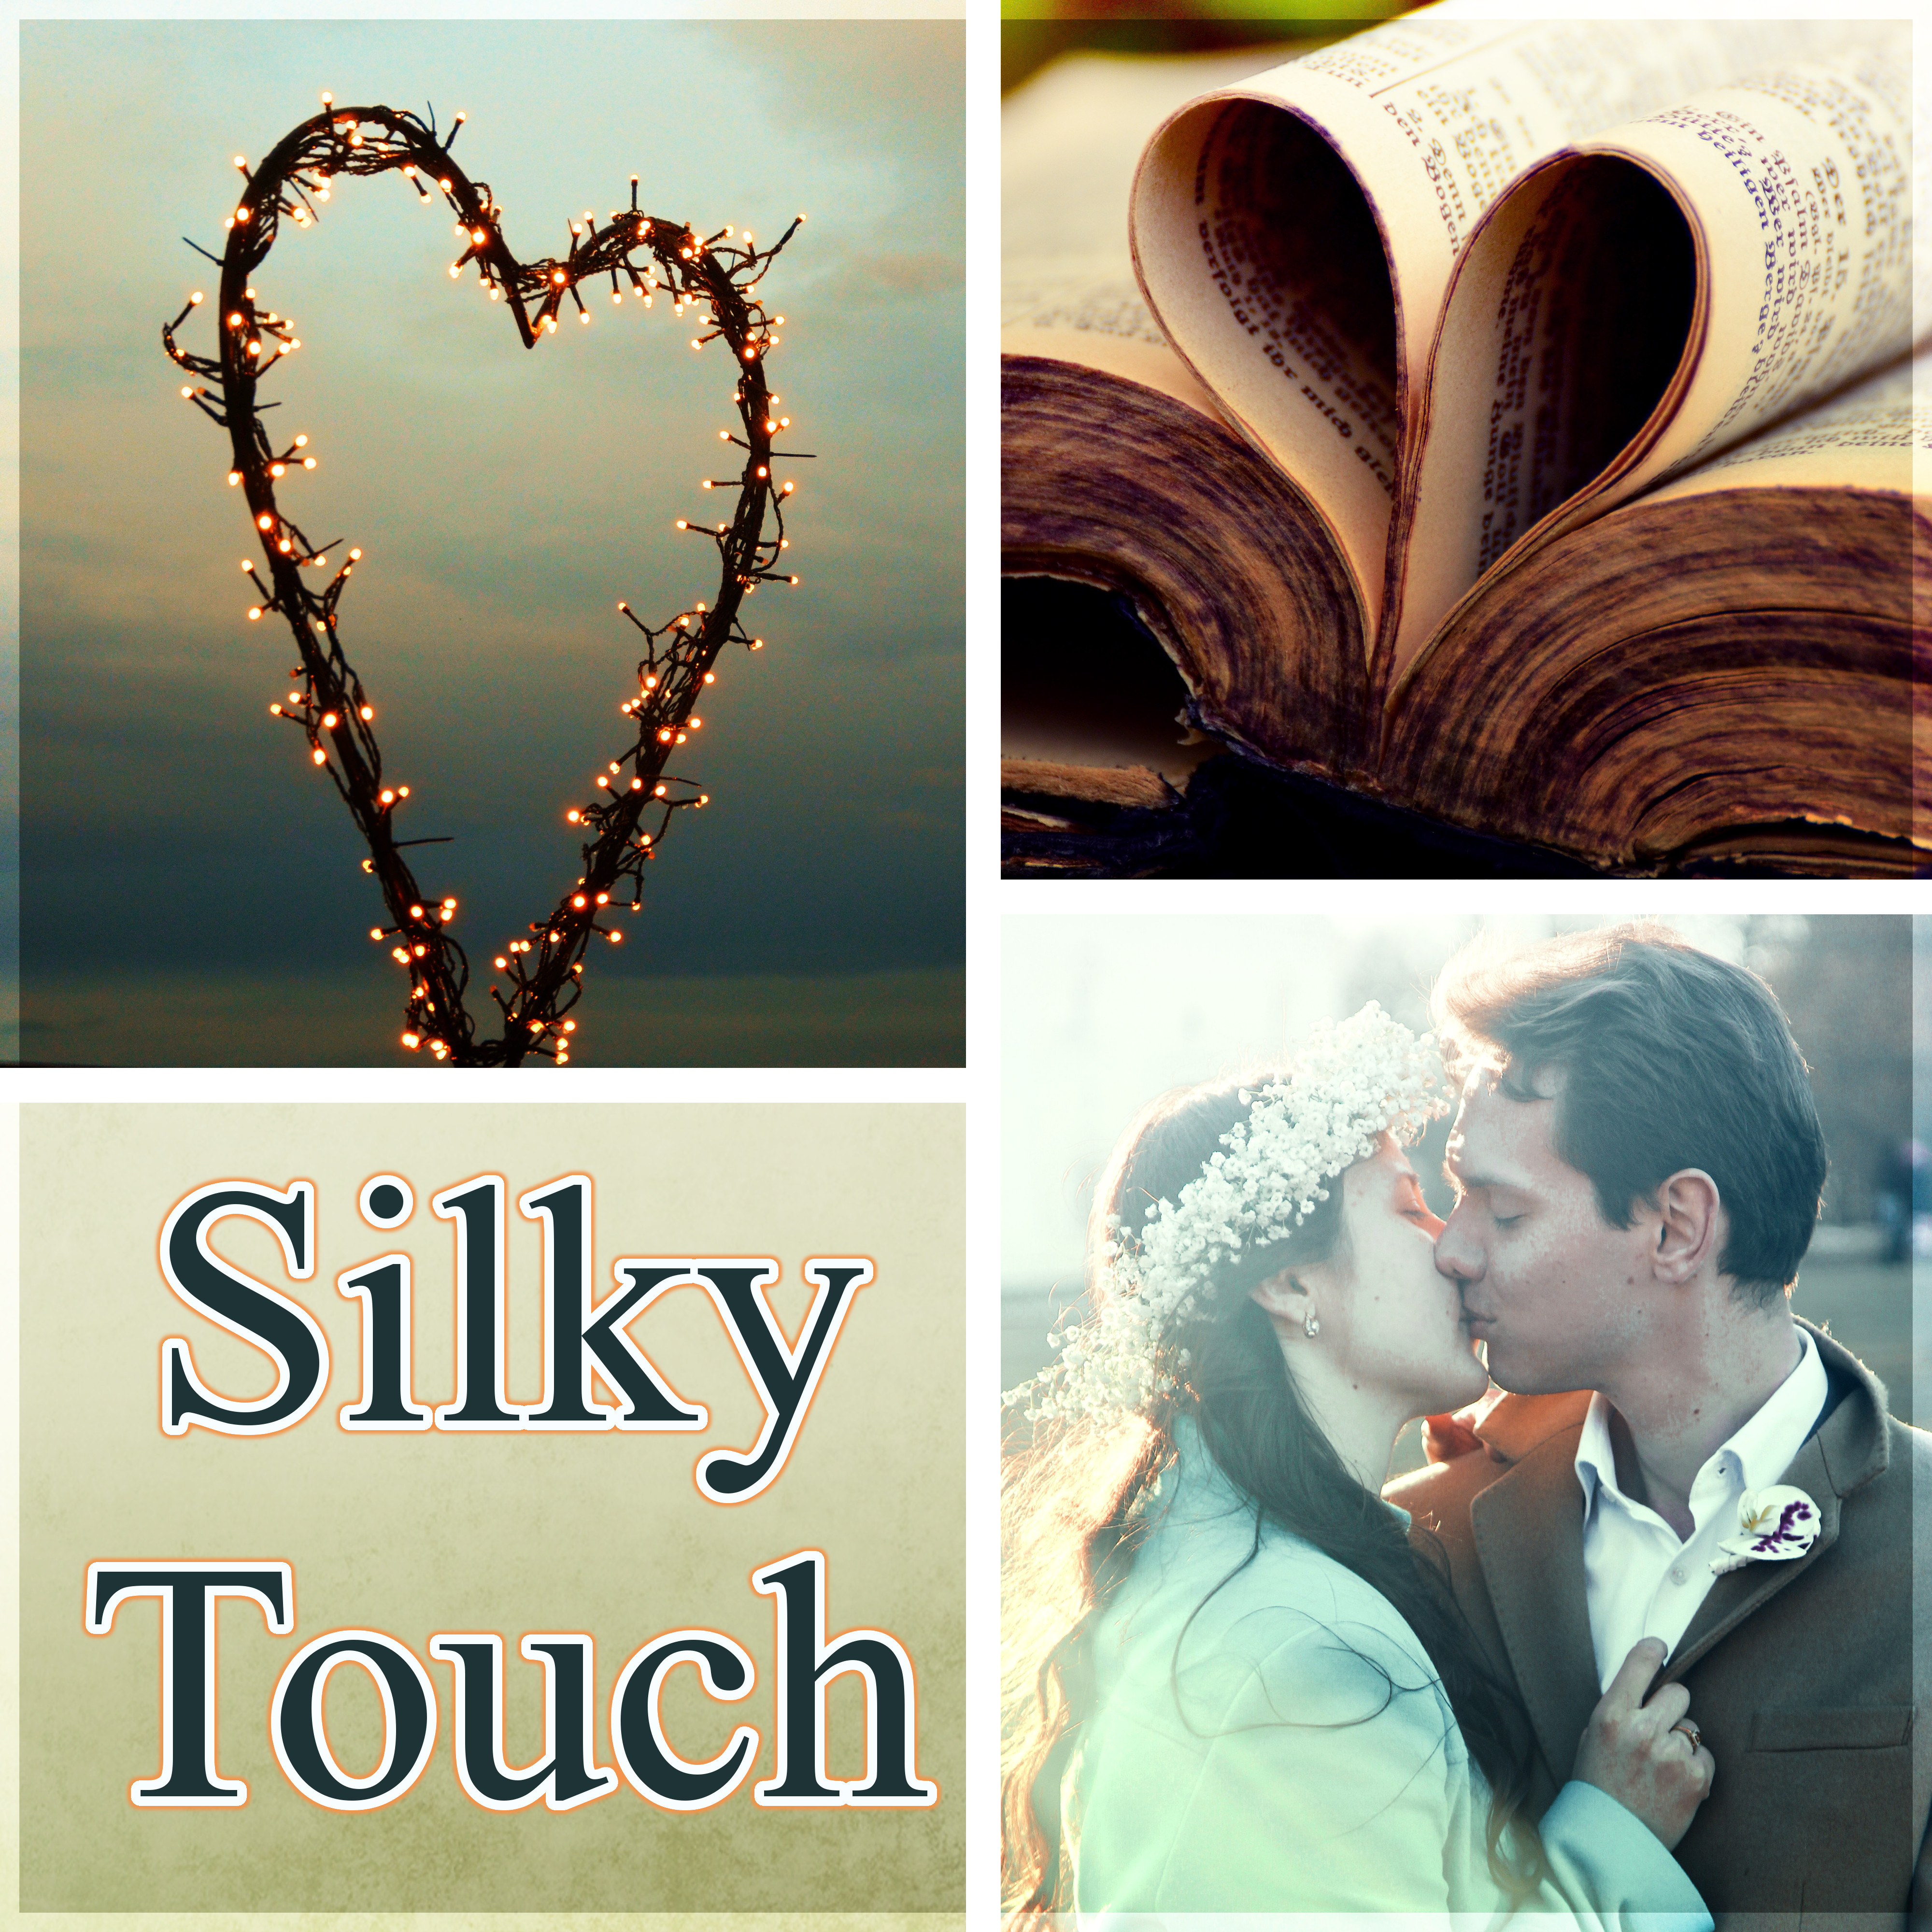 Silky Touch - Calm Music, Secret Piano, Guitar, Romance, Mood, Lovers, Emotion, Sensuality